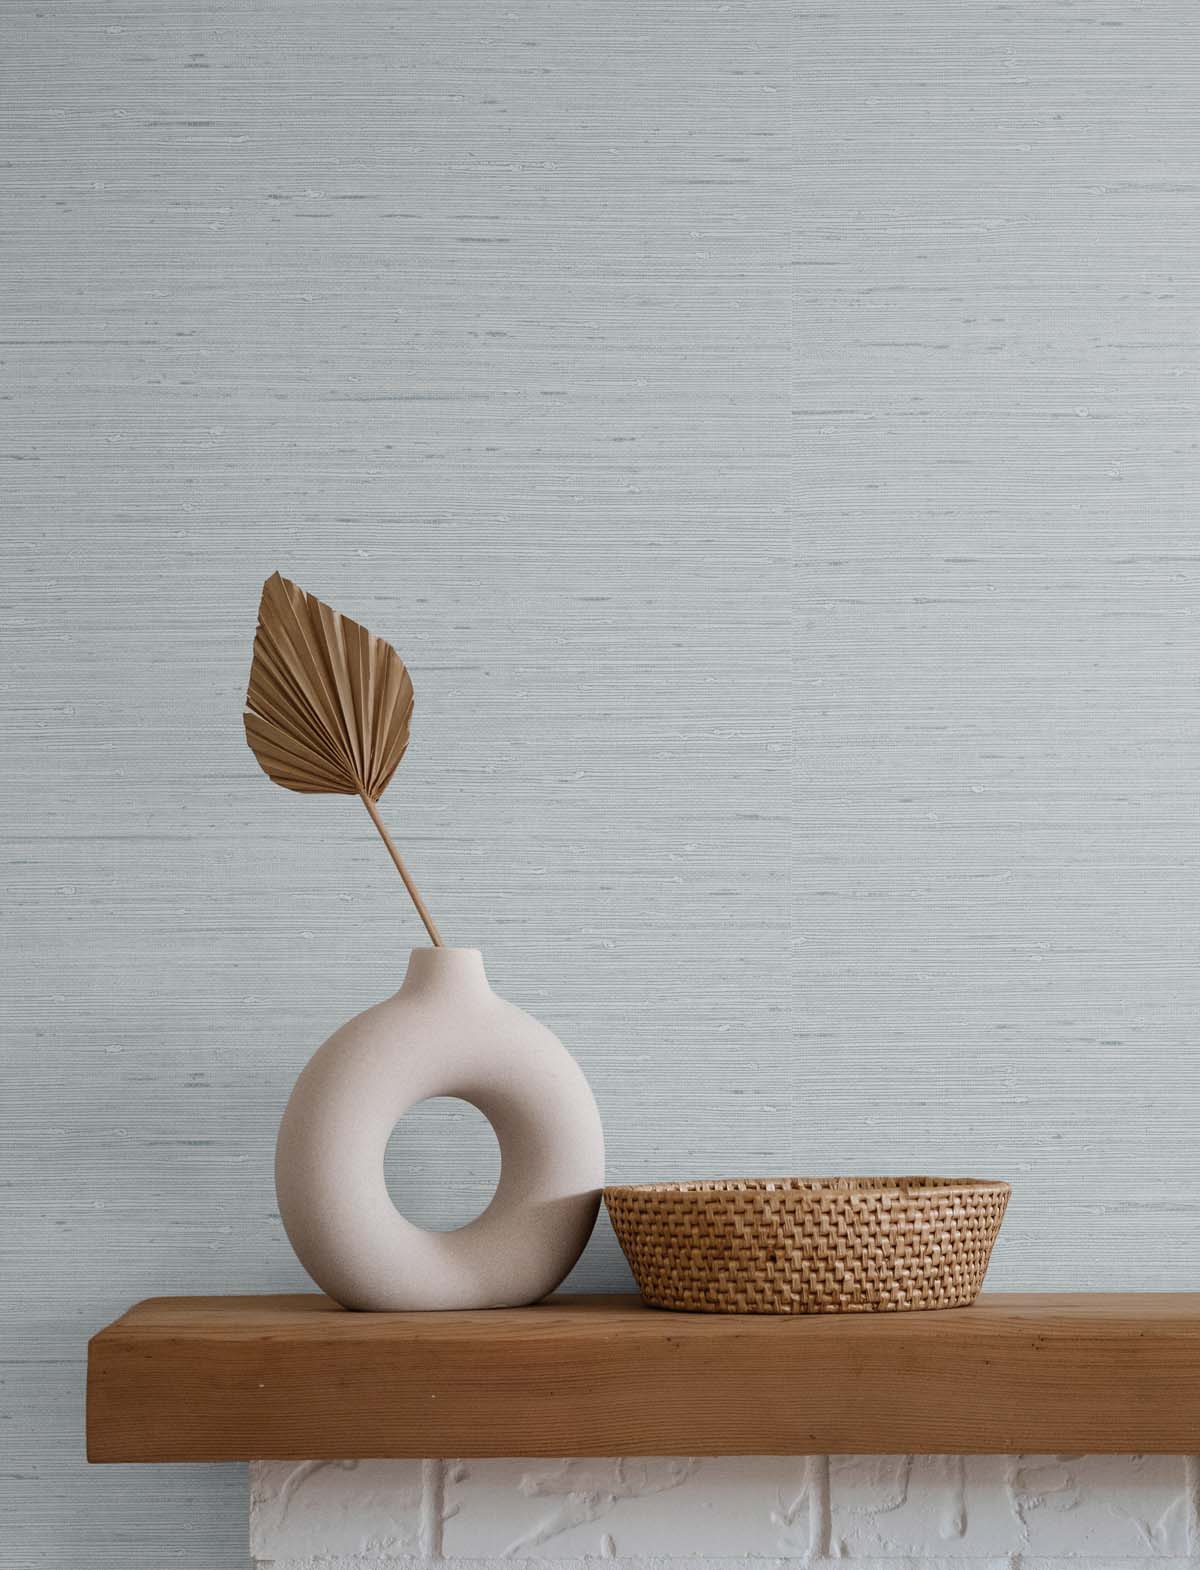 blue gray grasscloth wallpaper with a white stone vase, a brown leaf inside it, next to a wicker basket on top of a wooden and white stone mantle